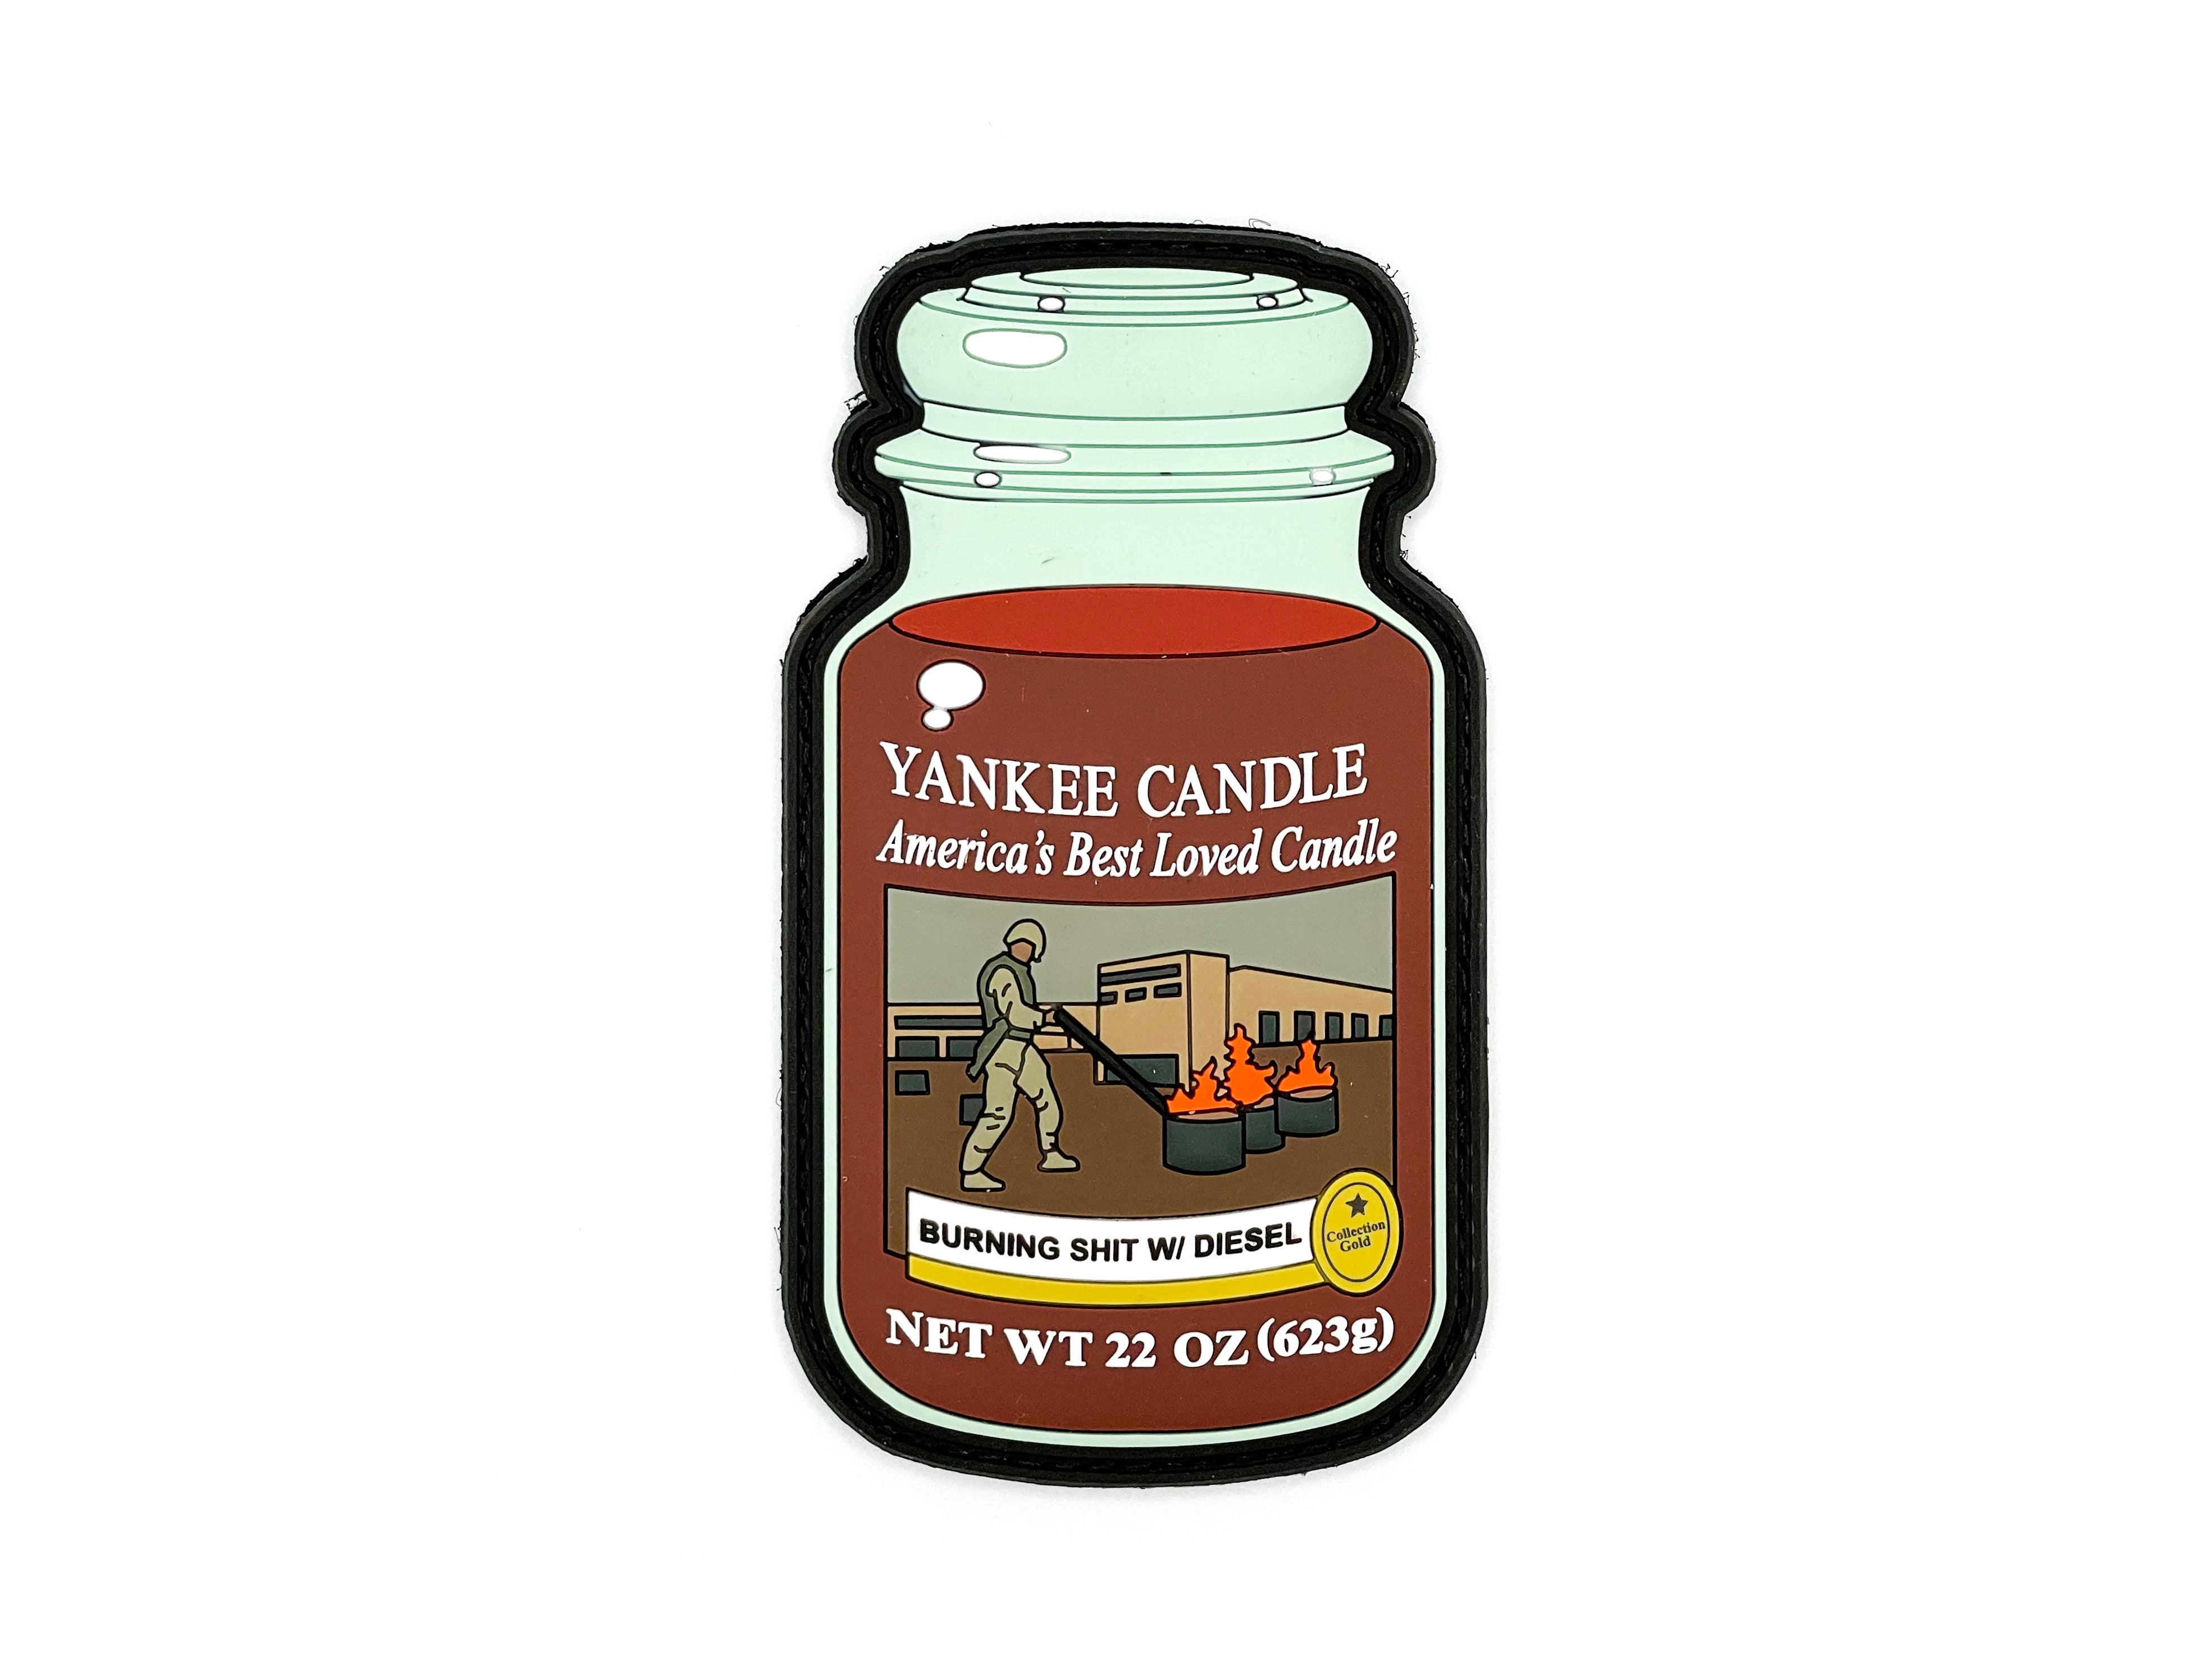 Yankee Candle - Burning S#1T W/ Diesel